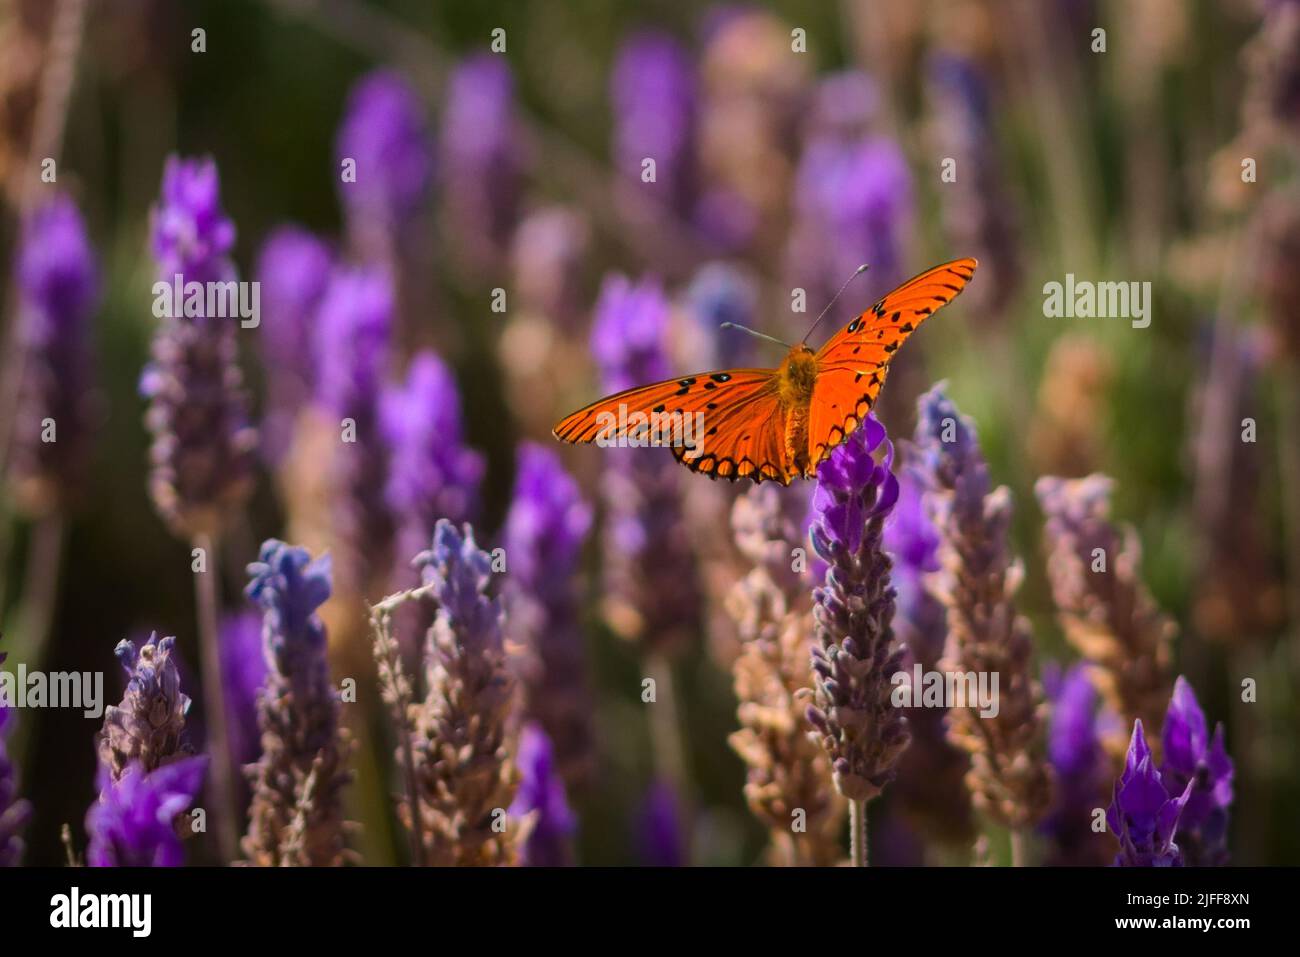 Passion butterfly (Dione vanillae) feeding on nectar from a lavender flower. Orange, colorful butterfly. Stock Photo